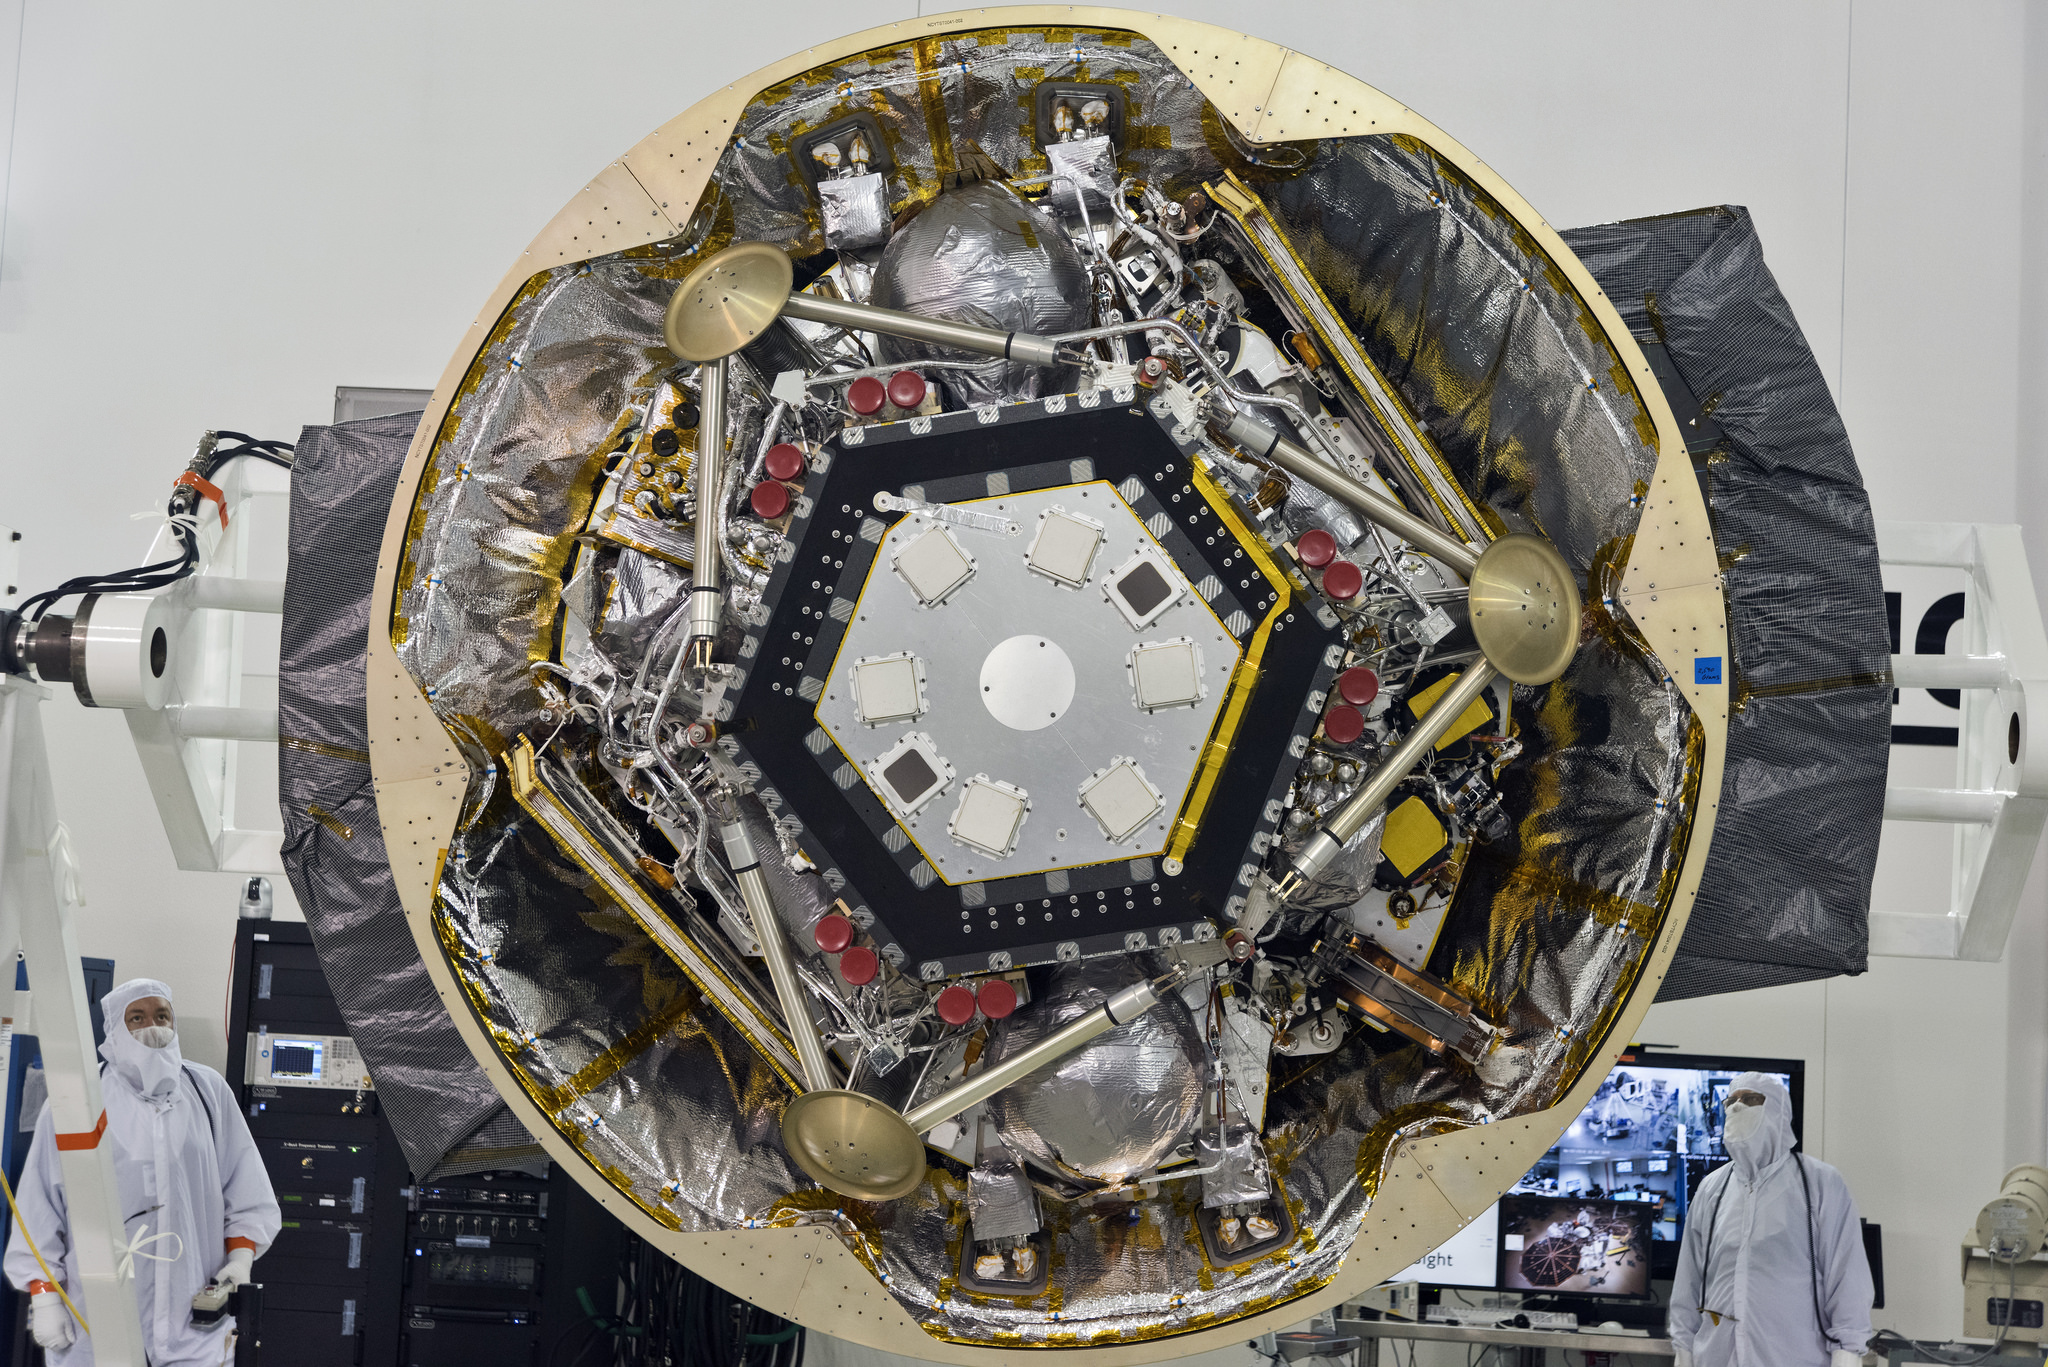 The Interior Exploration using Seismic Investigations, Geodesy and Heat Transport spacecraft (InSight) will launch from Vandenberg Air Force Base in California.<br />Credits: NASA